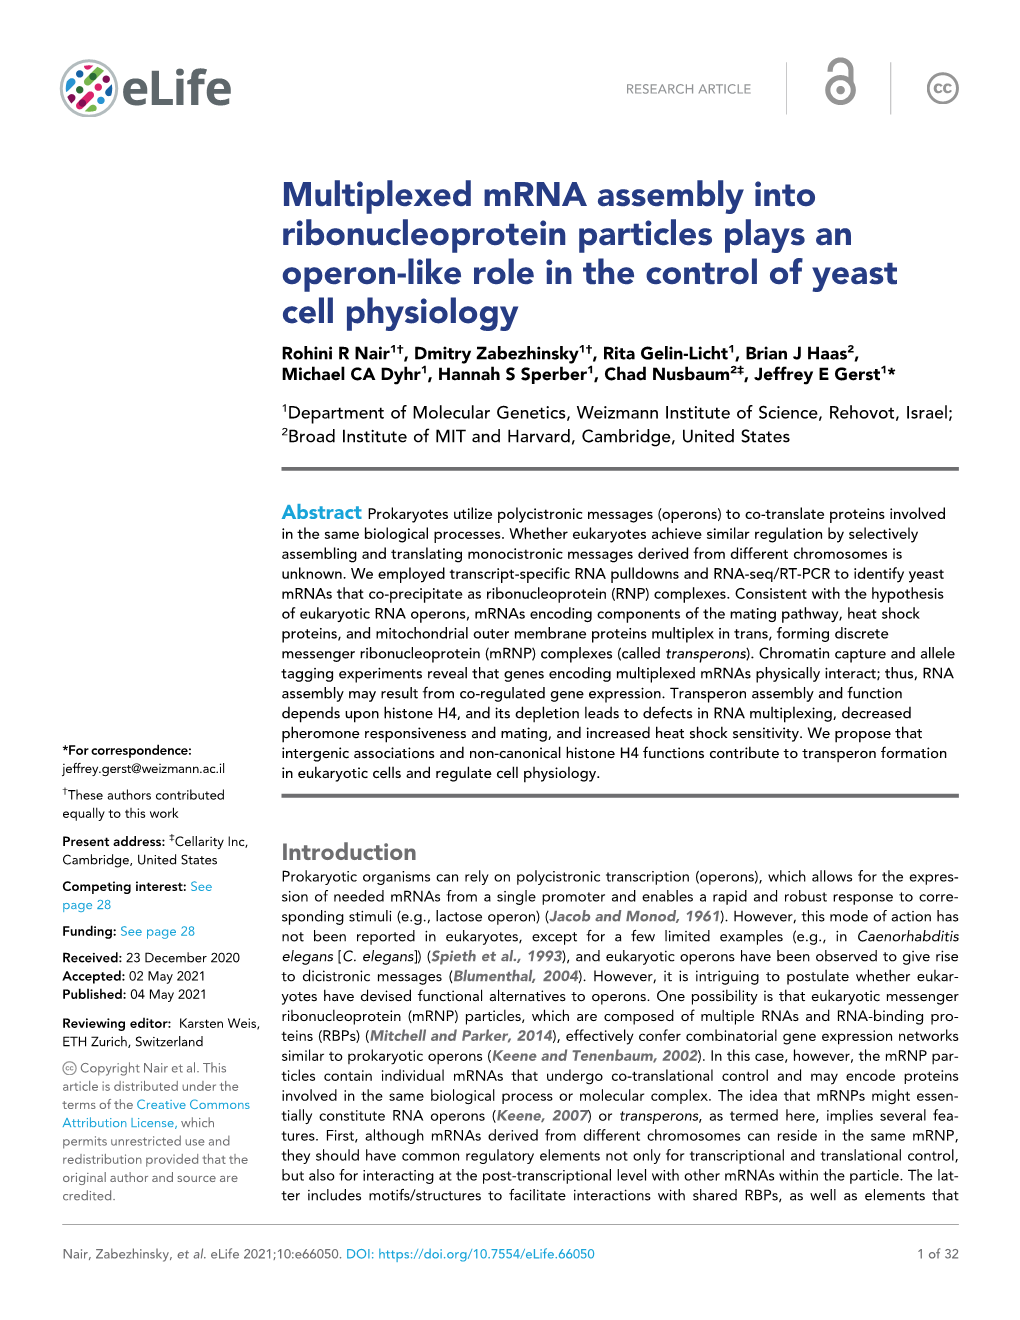 Multiplexed Mrna Assembly Into Ribonucleoprotein Particles Plays An